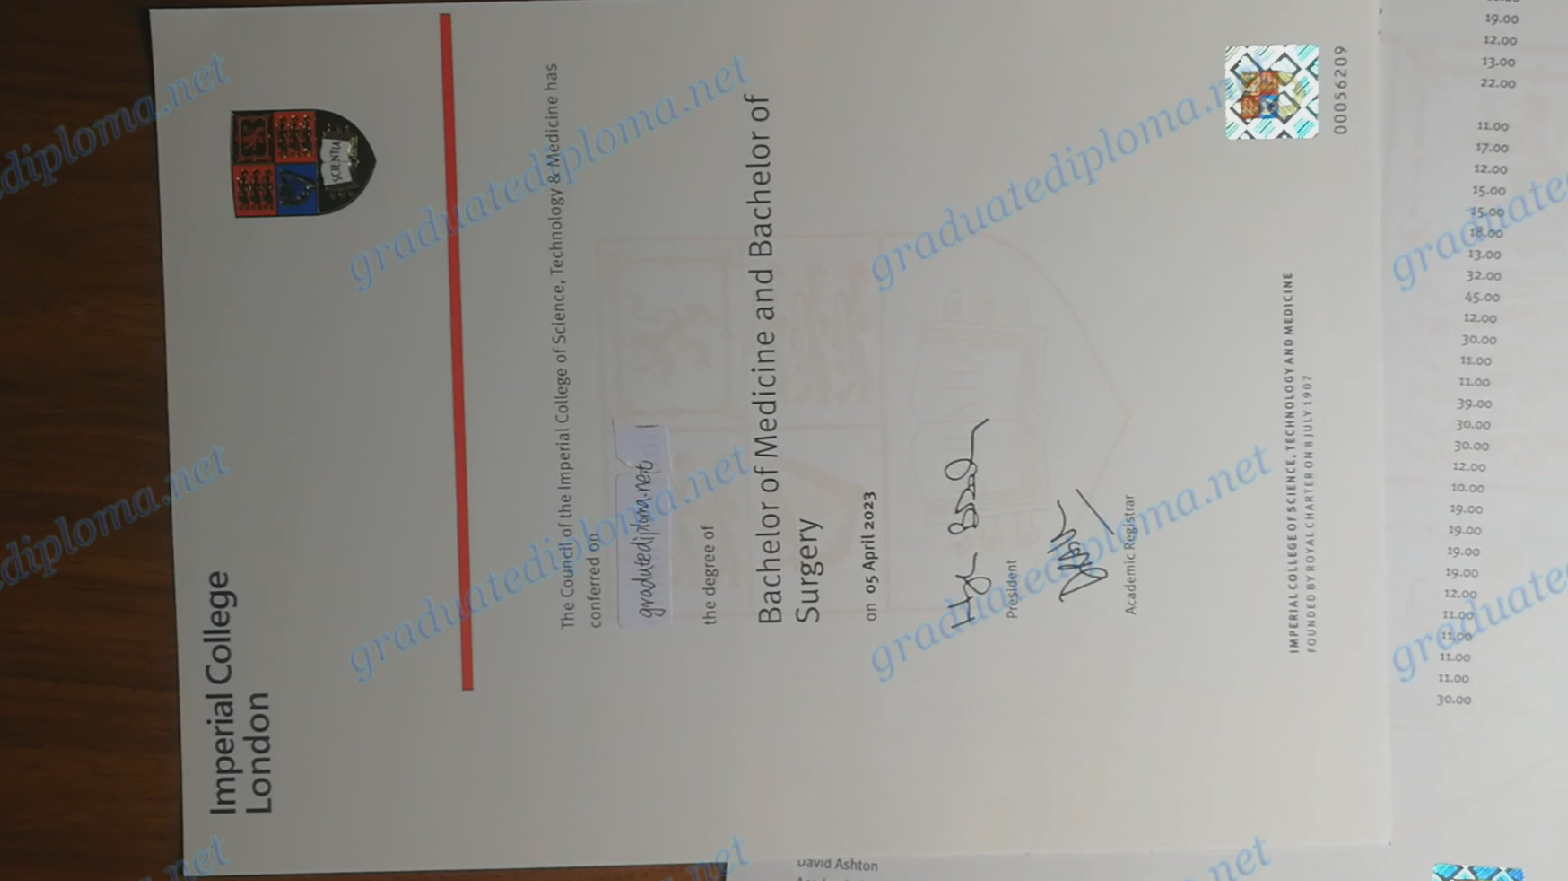 Imperial College London diploma